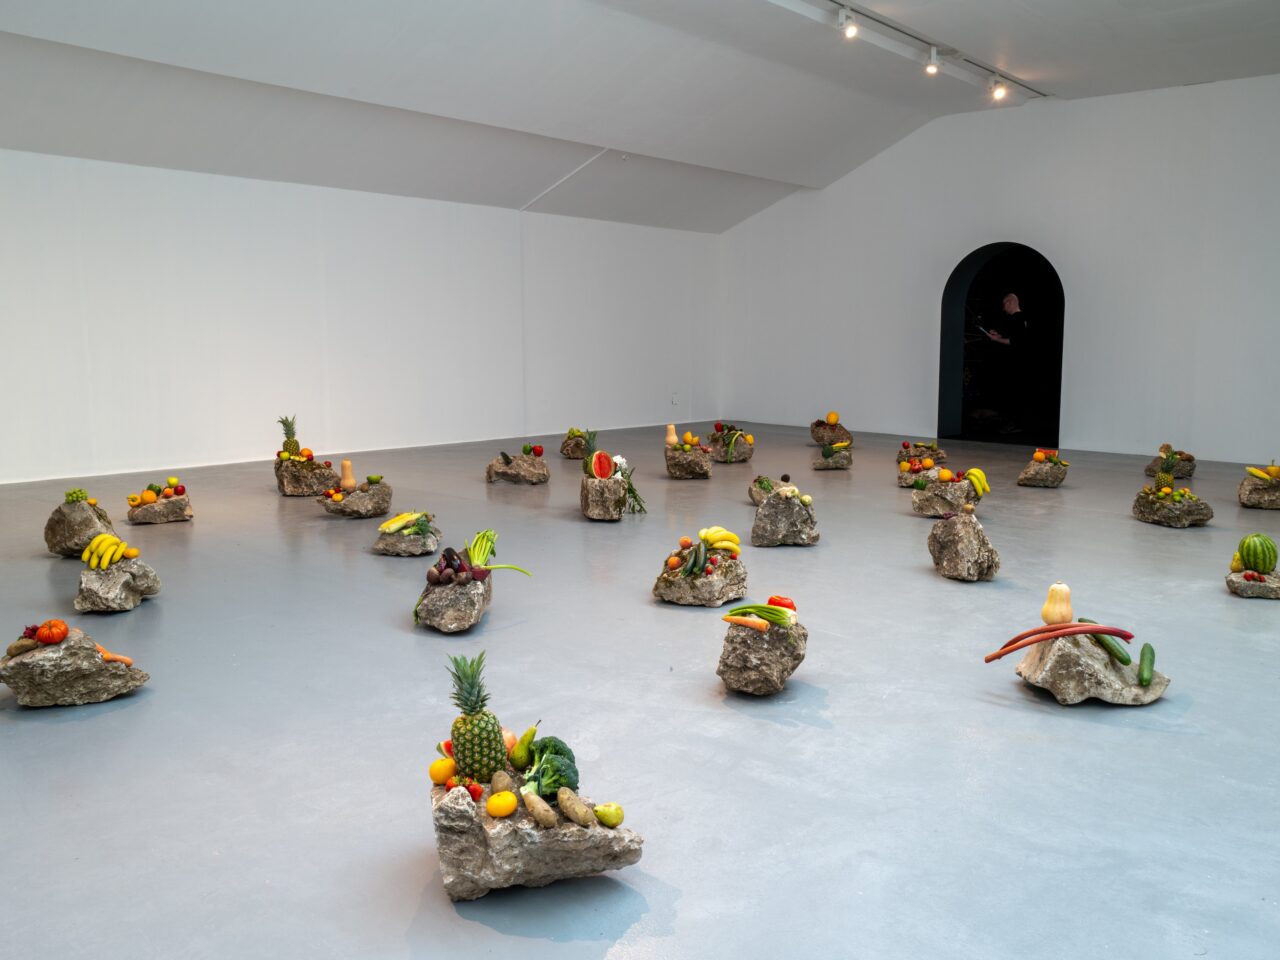 An installation in a white gallery space. The installation is spread along the whole gallery floor and consists of large rocks with a variety of fruit laid upon them